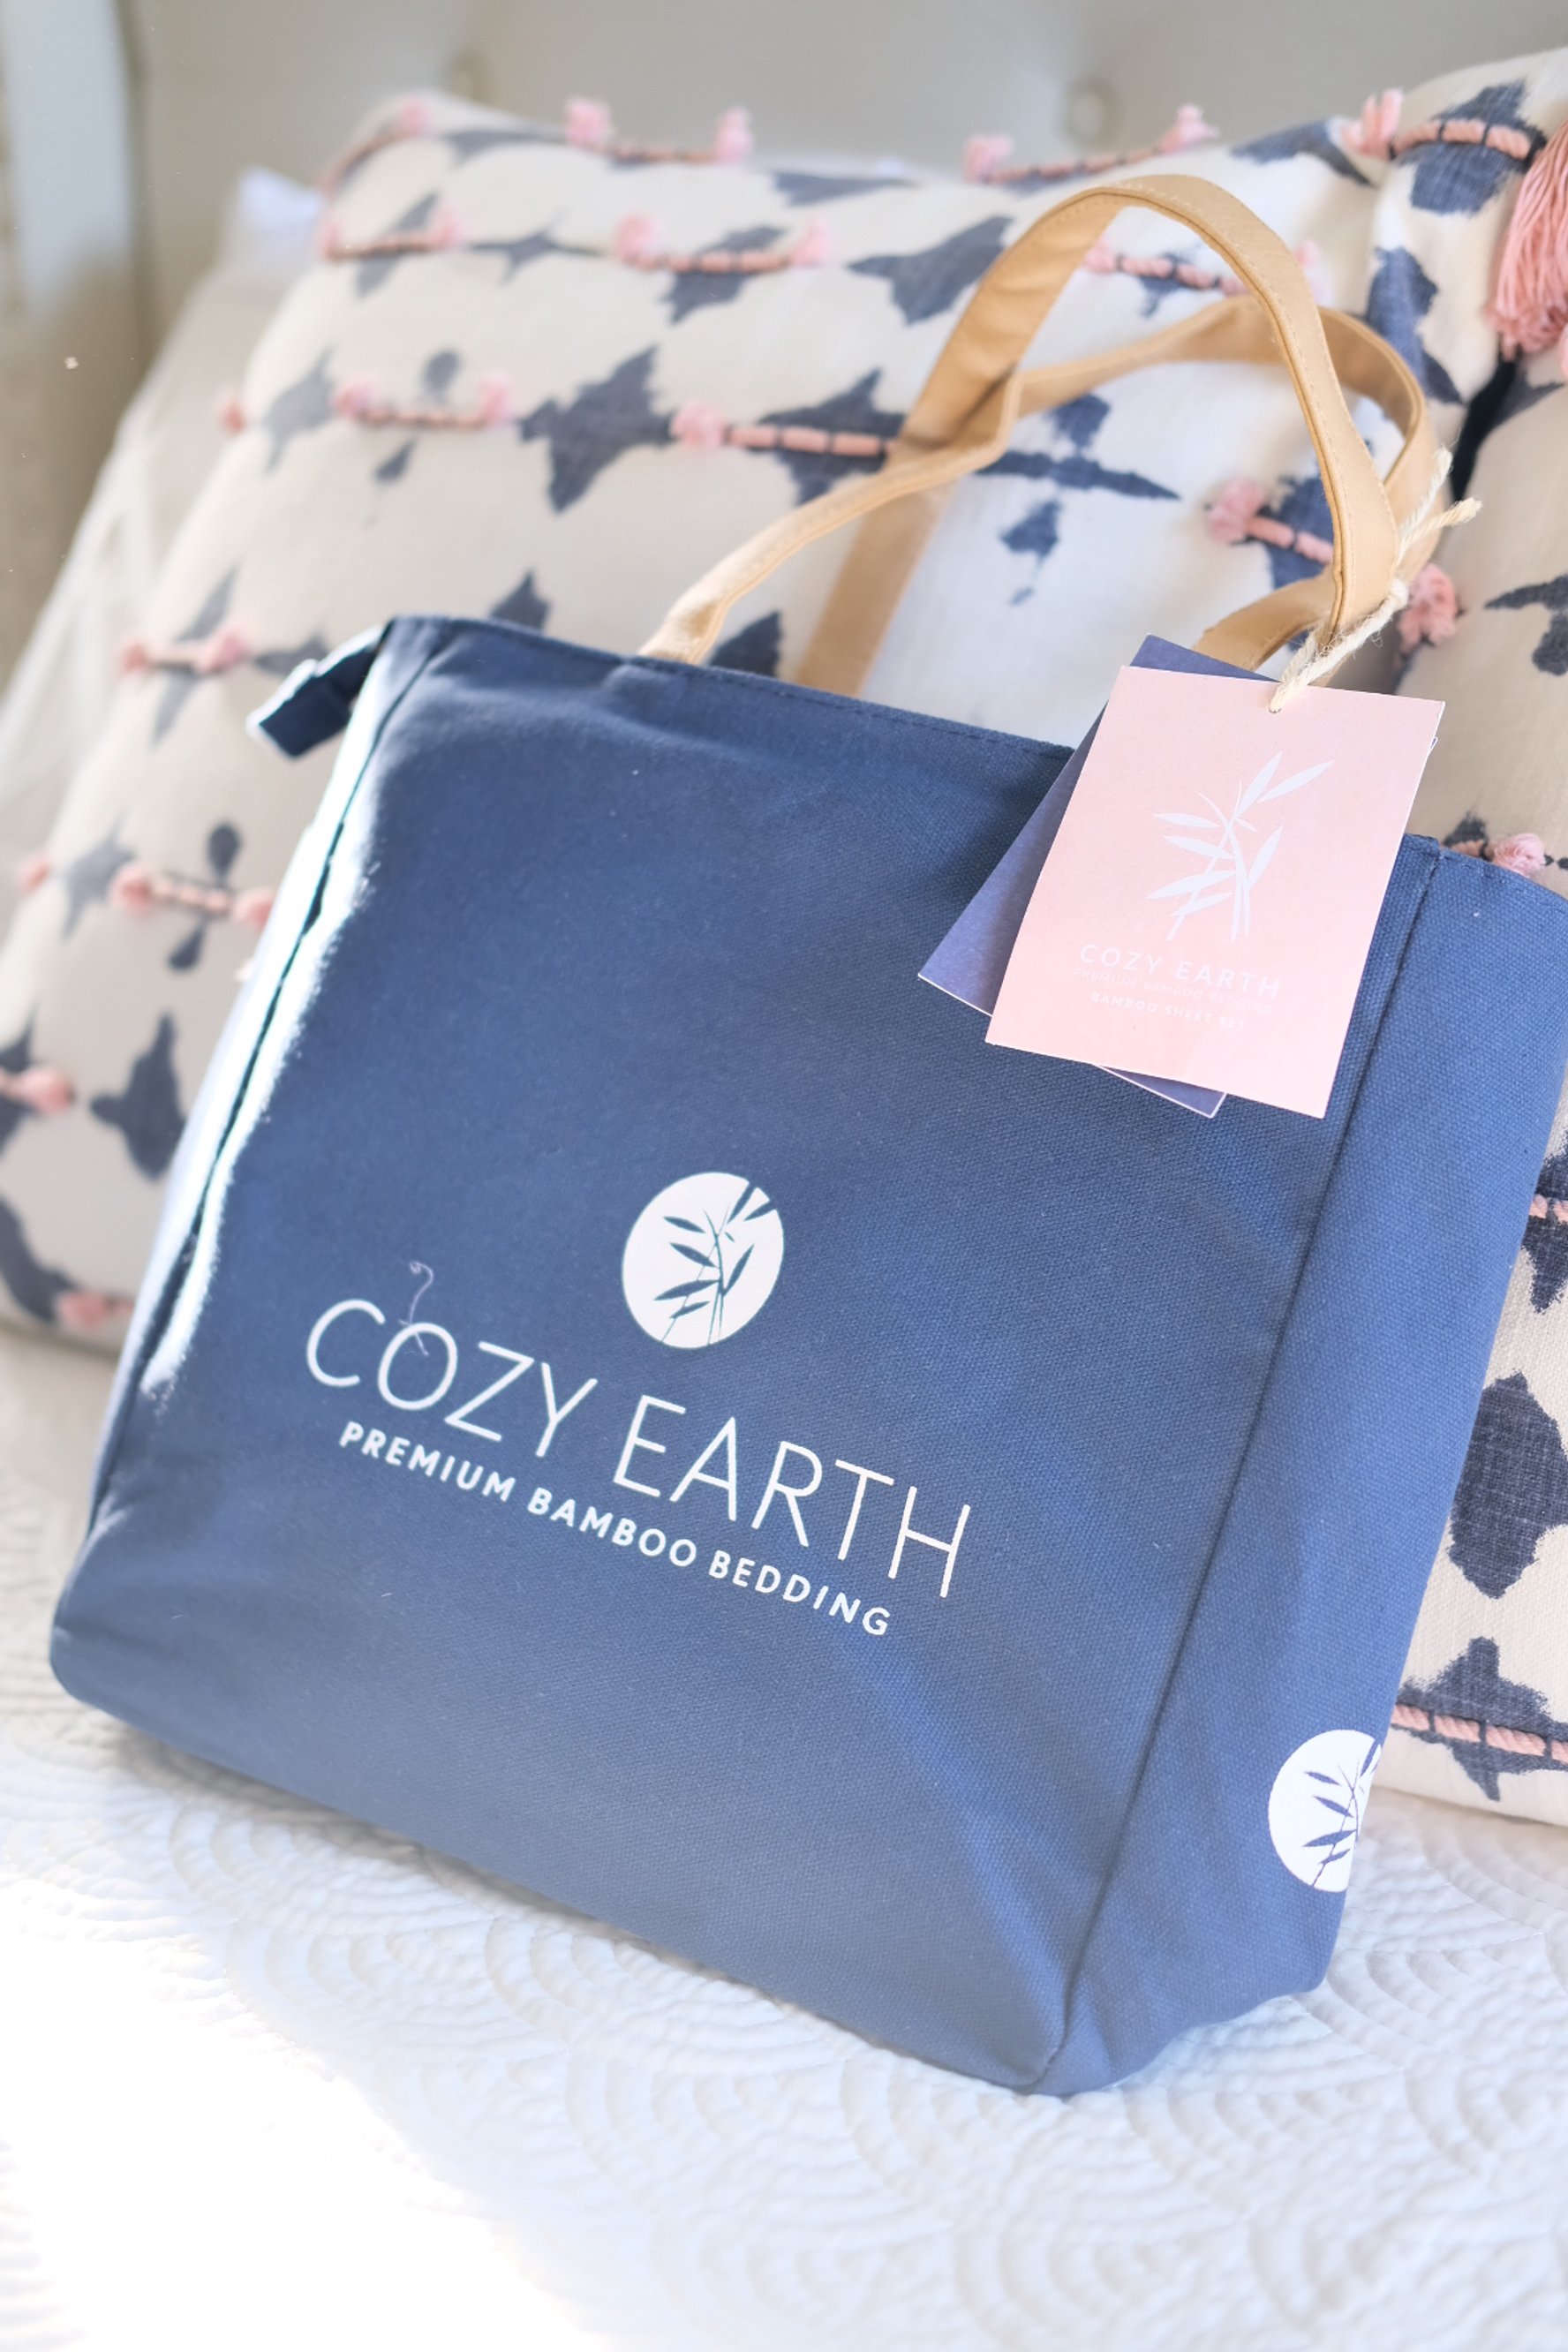 If you are looking for Cozy Earth Comforter reviews, then look no further. I have everything you need to know in this Cozy Earth Comforter Review, along with a Cozy Earth discount code that will get you a whopping 40% off all Cozy Earth products!